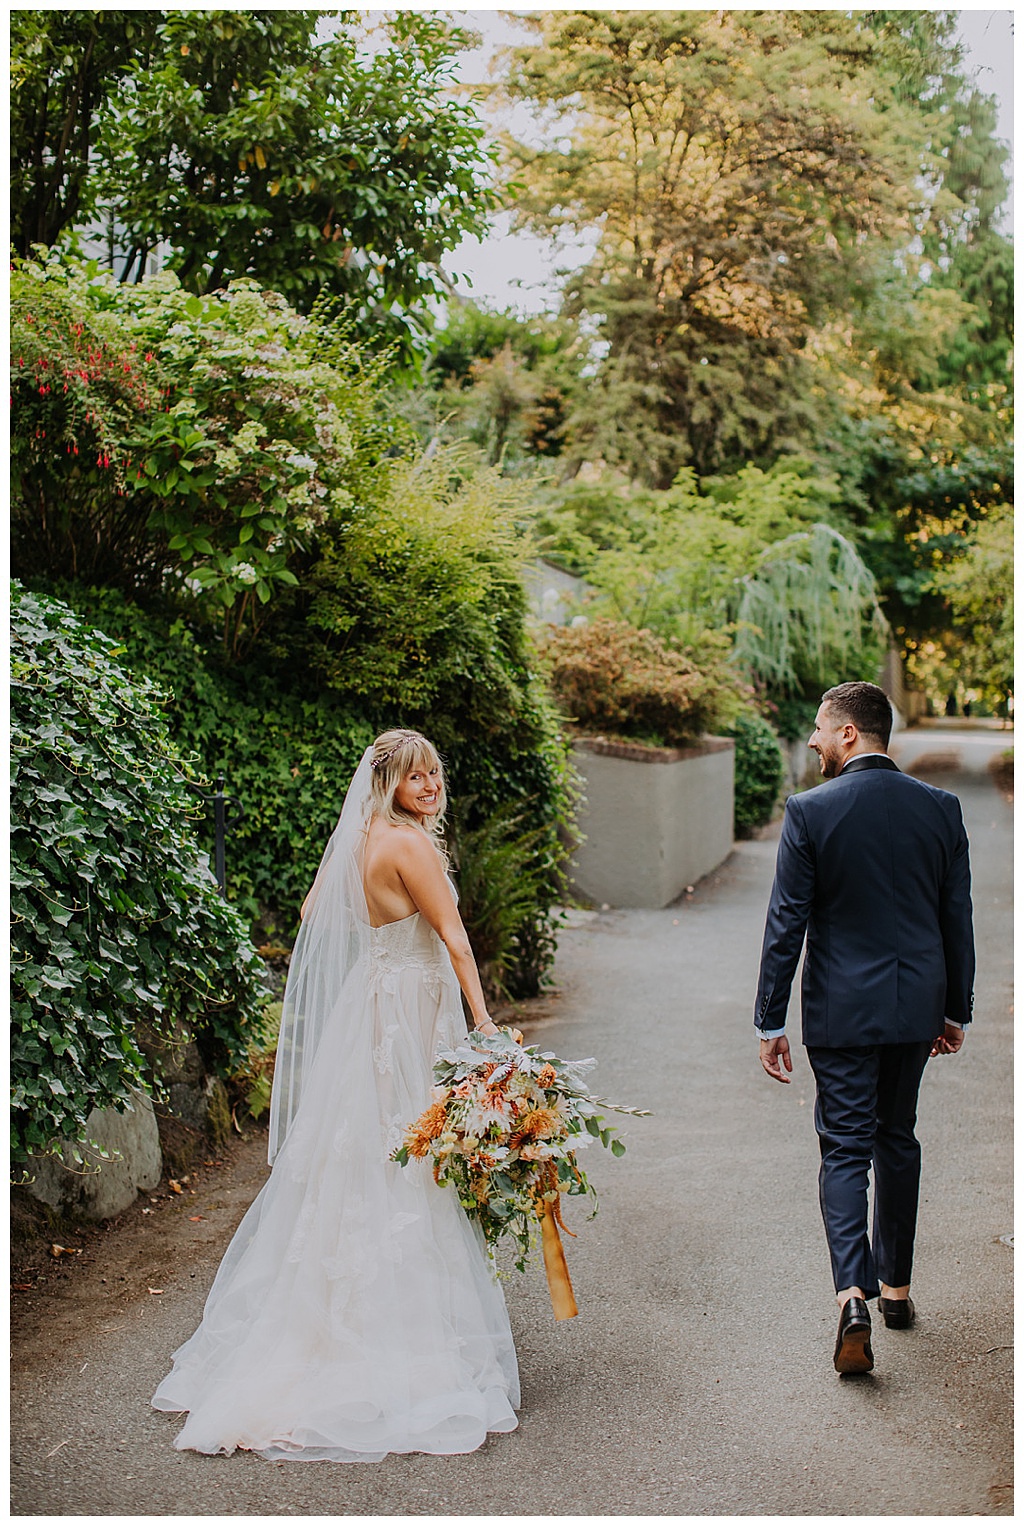 The couple walking holding the fall bridal bouquet